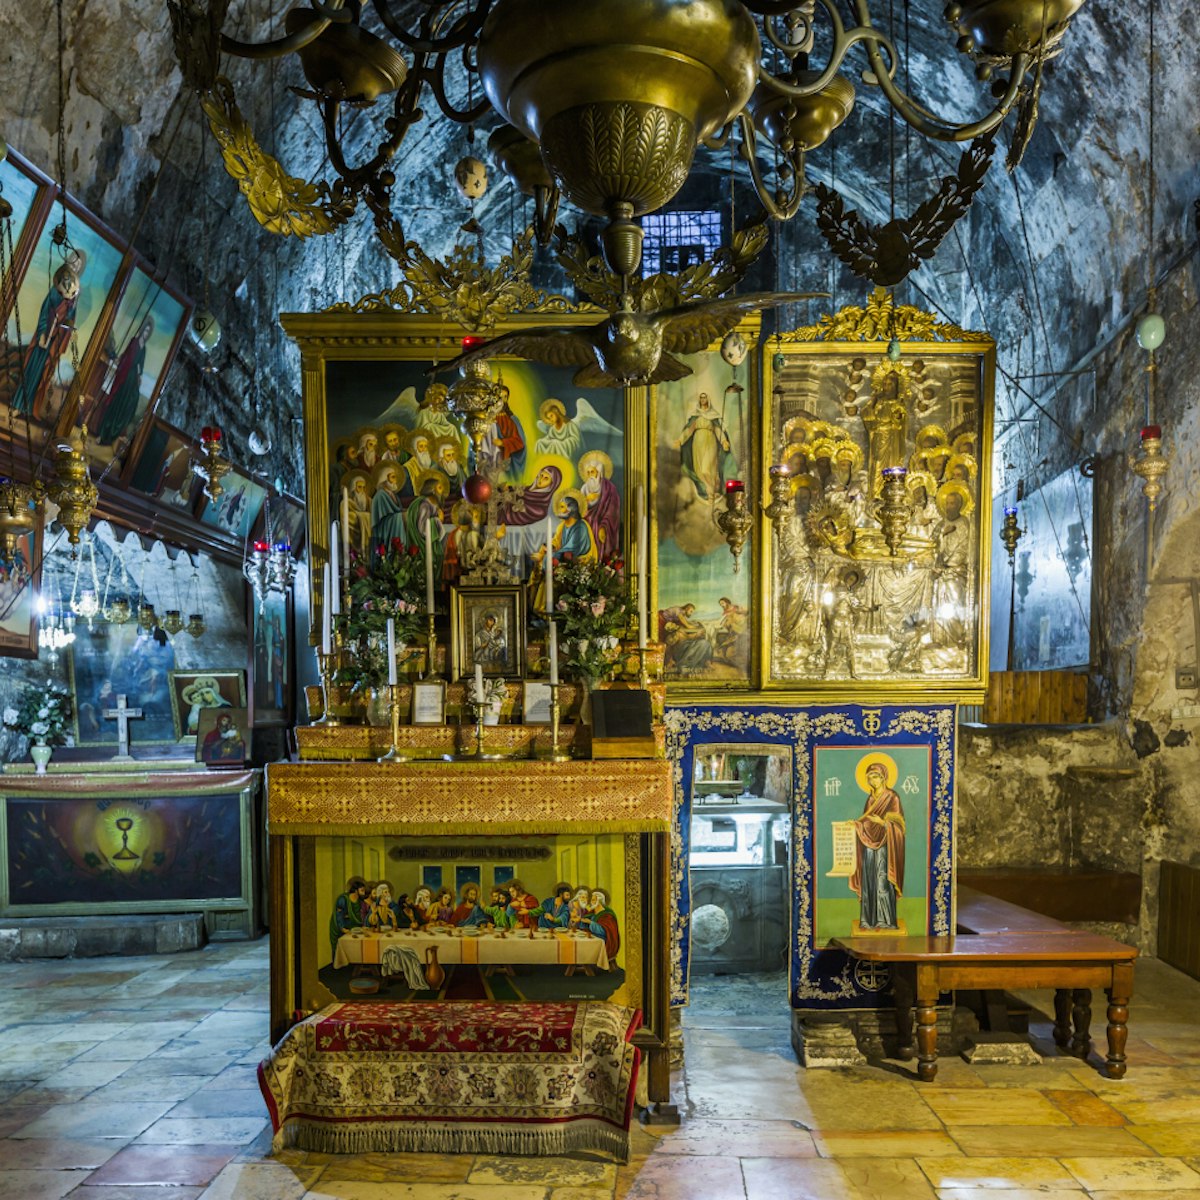 Tomb of the Virgin Mary (also known as Church of the Sepulchre of Saint Mary), the interior